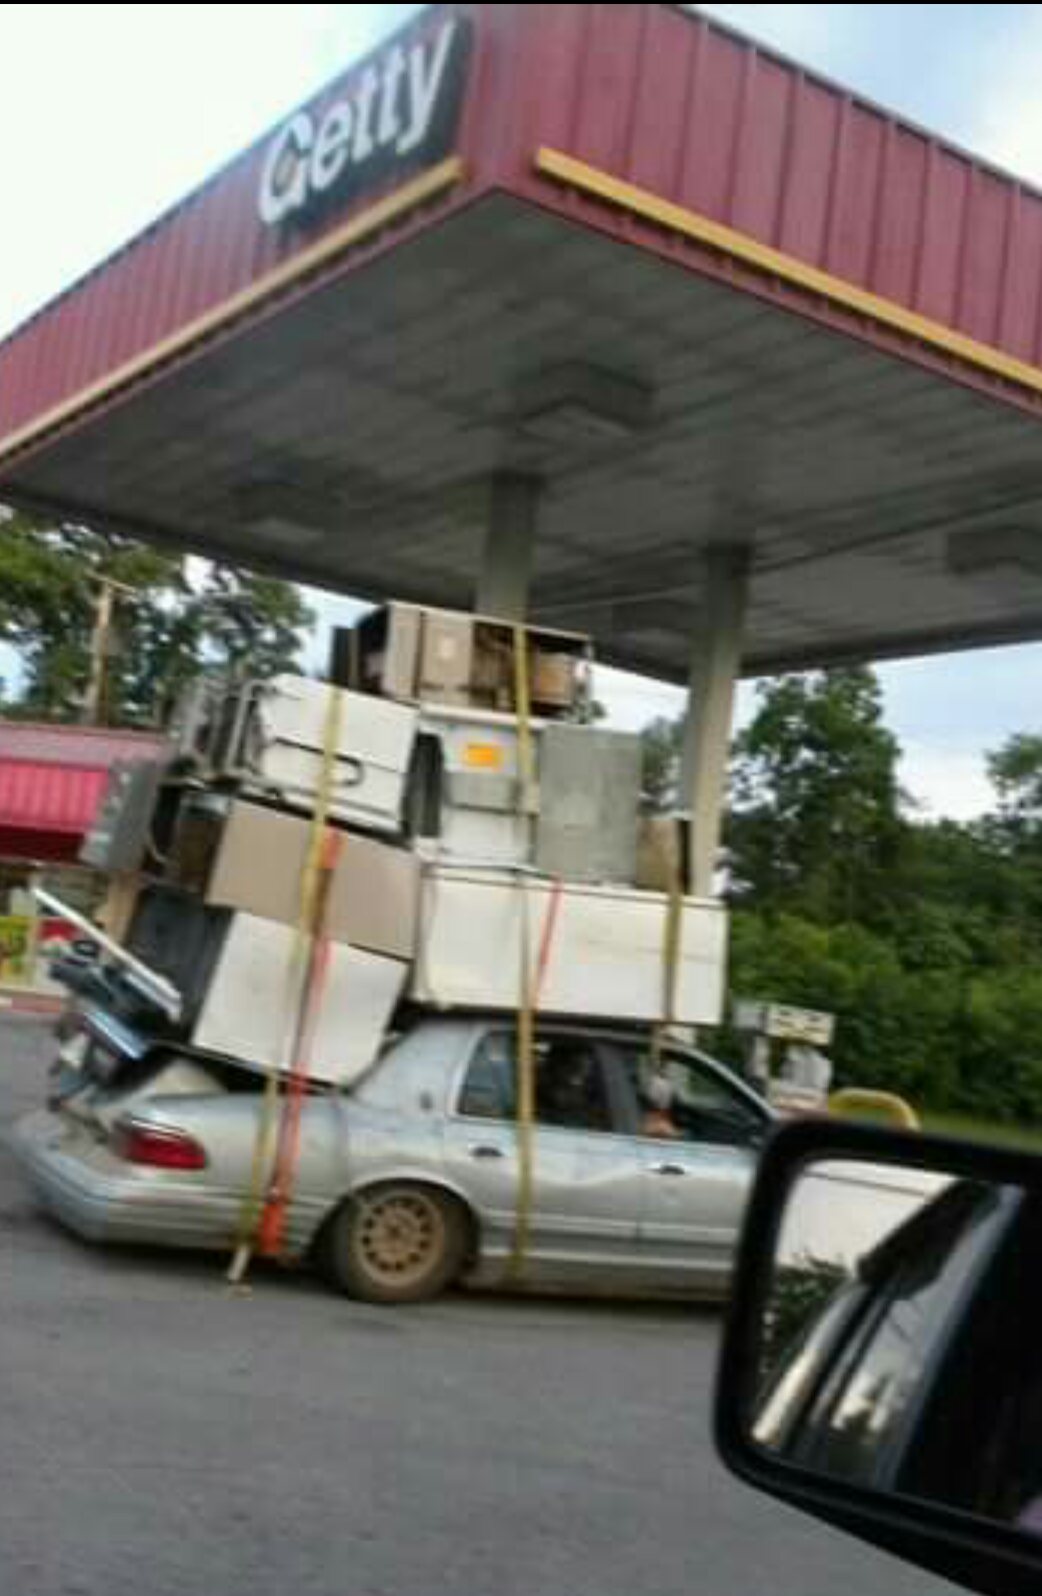 Why rent a U-Haul when you have plenty of straps?